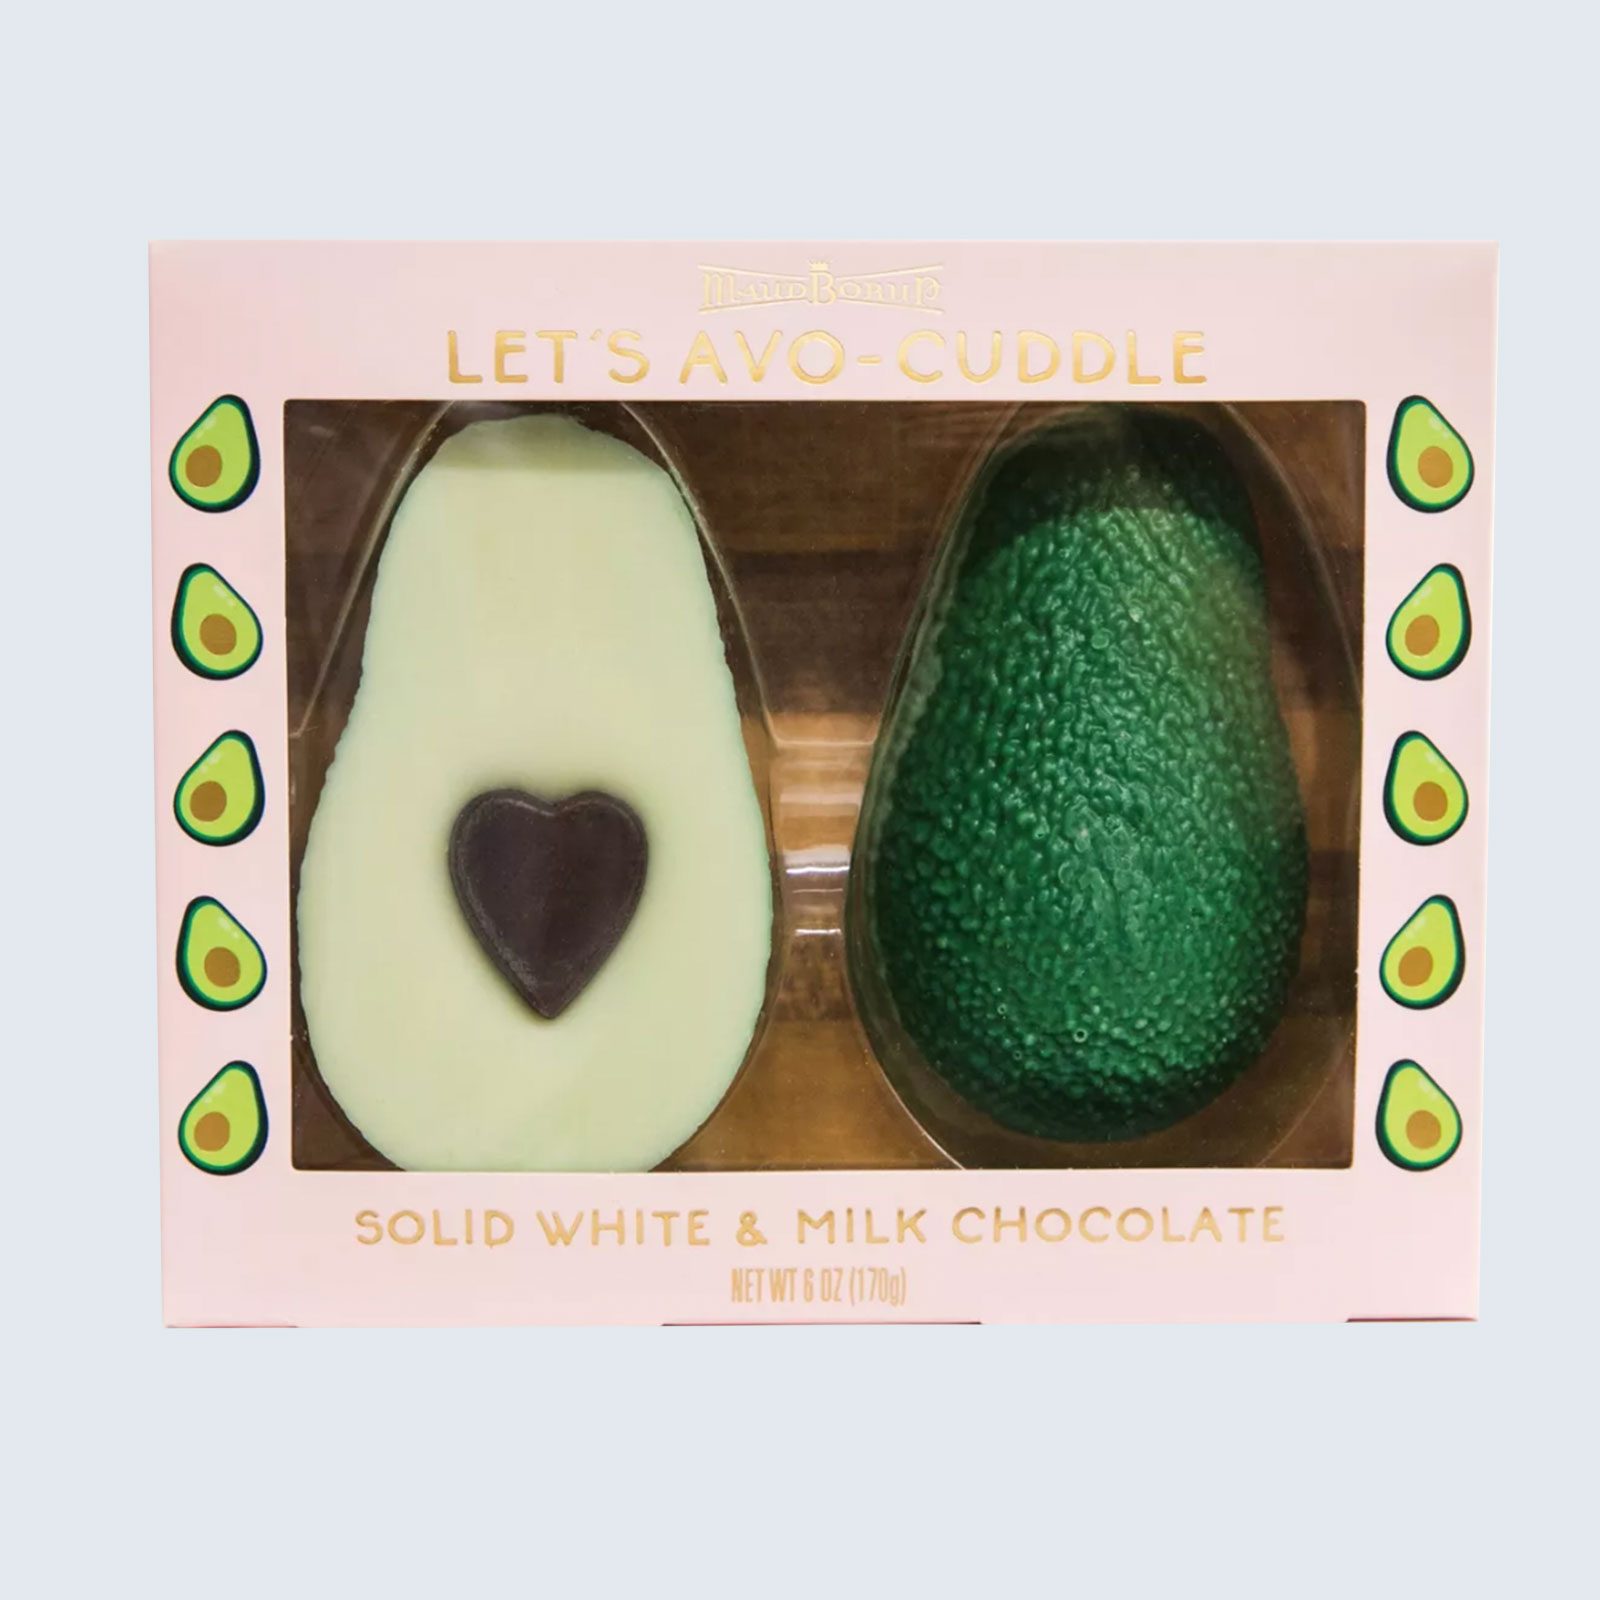 For the guac lover: Let's Avo-Cuddle Chocolate